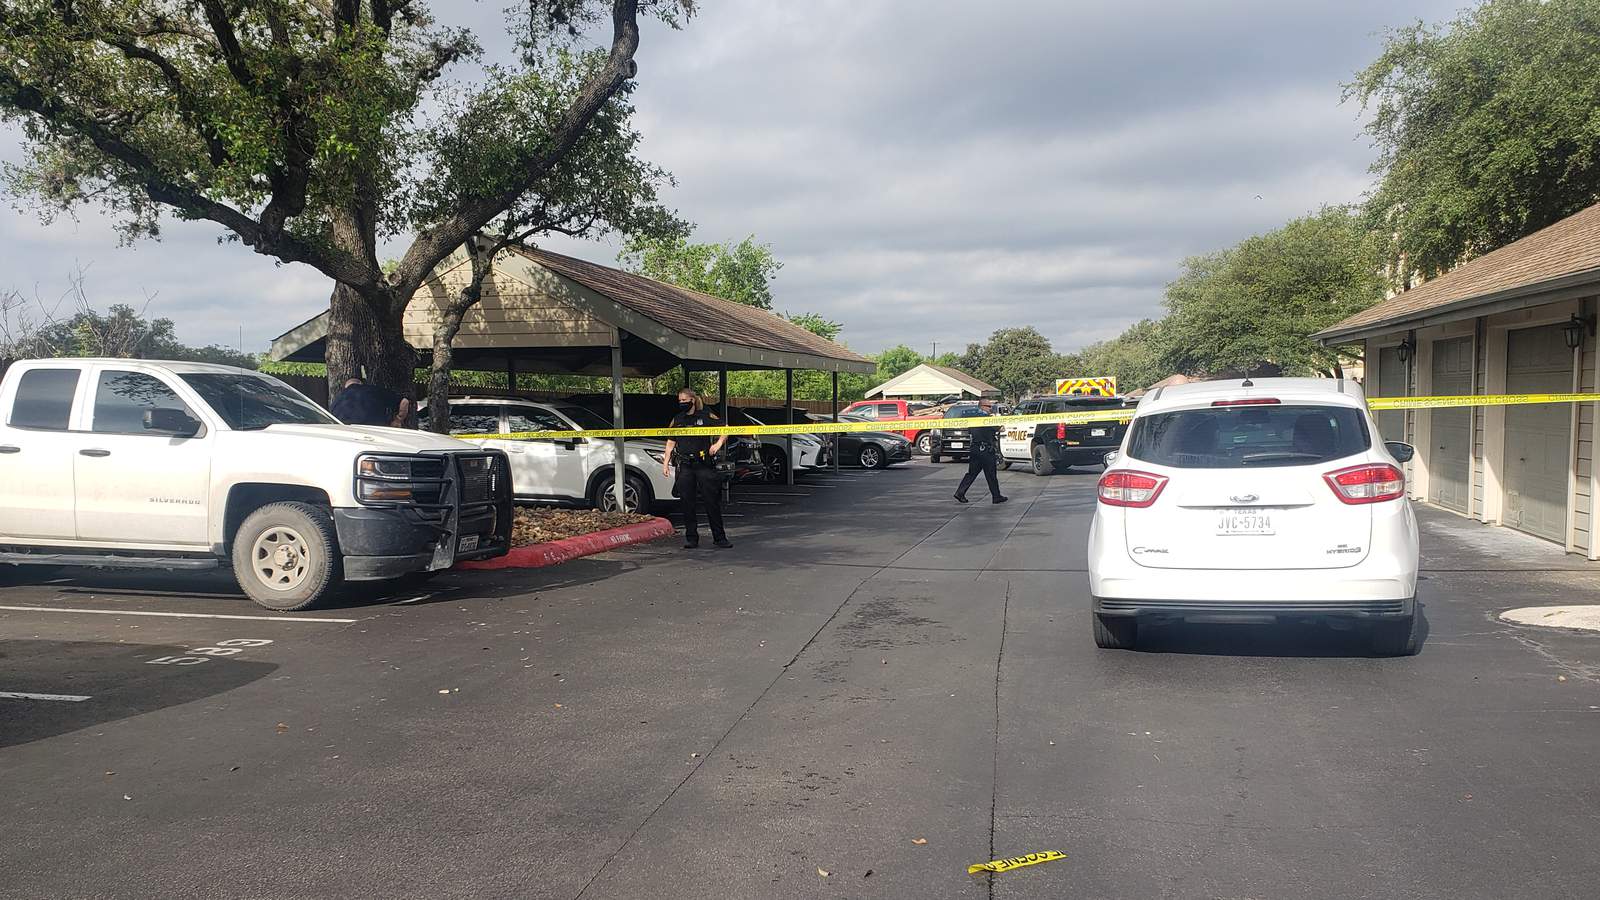 Police: Woman fatally shot children, ages 3 and 5, and mother at San Antonio apartment